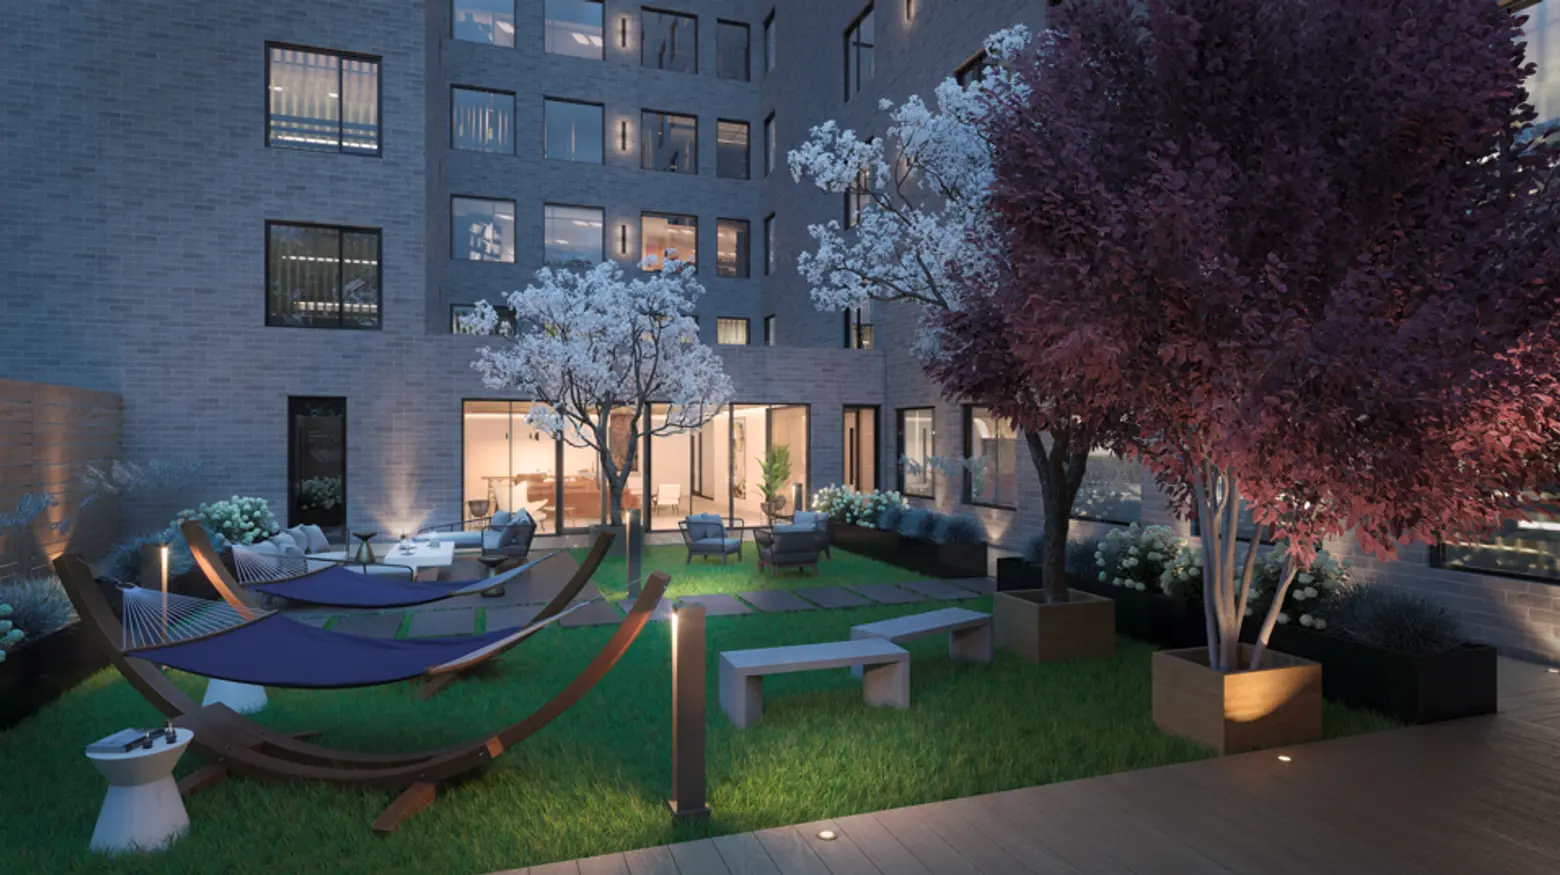 25 low-income units available at 14-story Mott Haven condominium, from $1,576/month